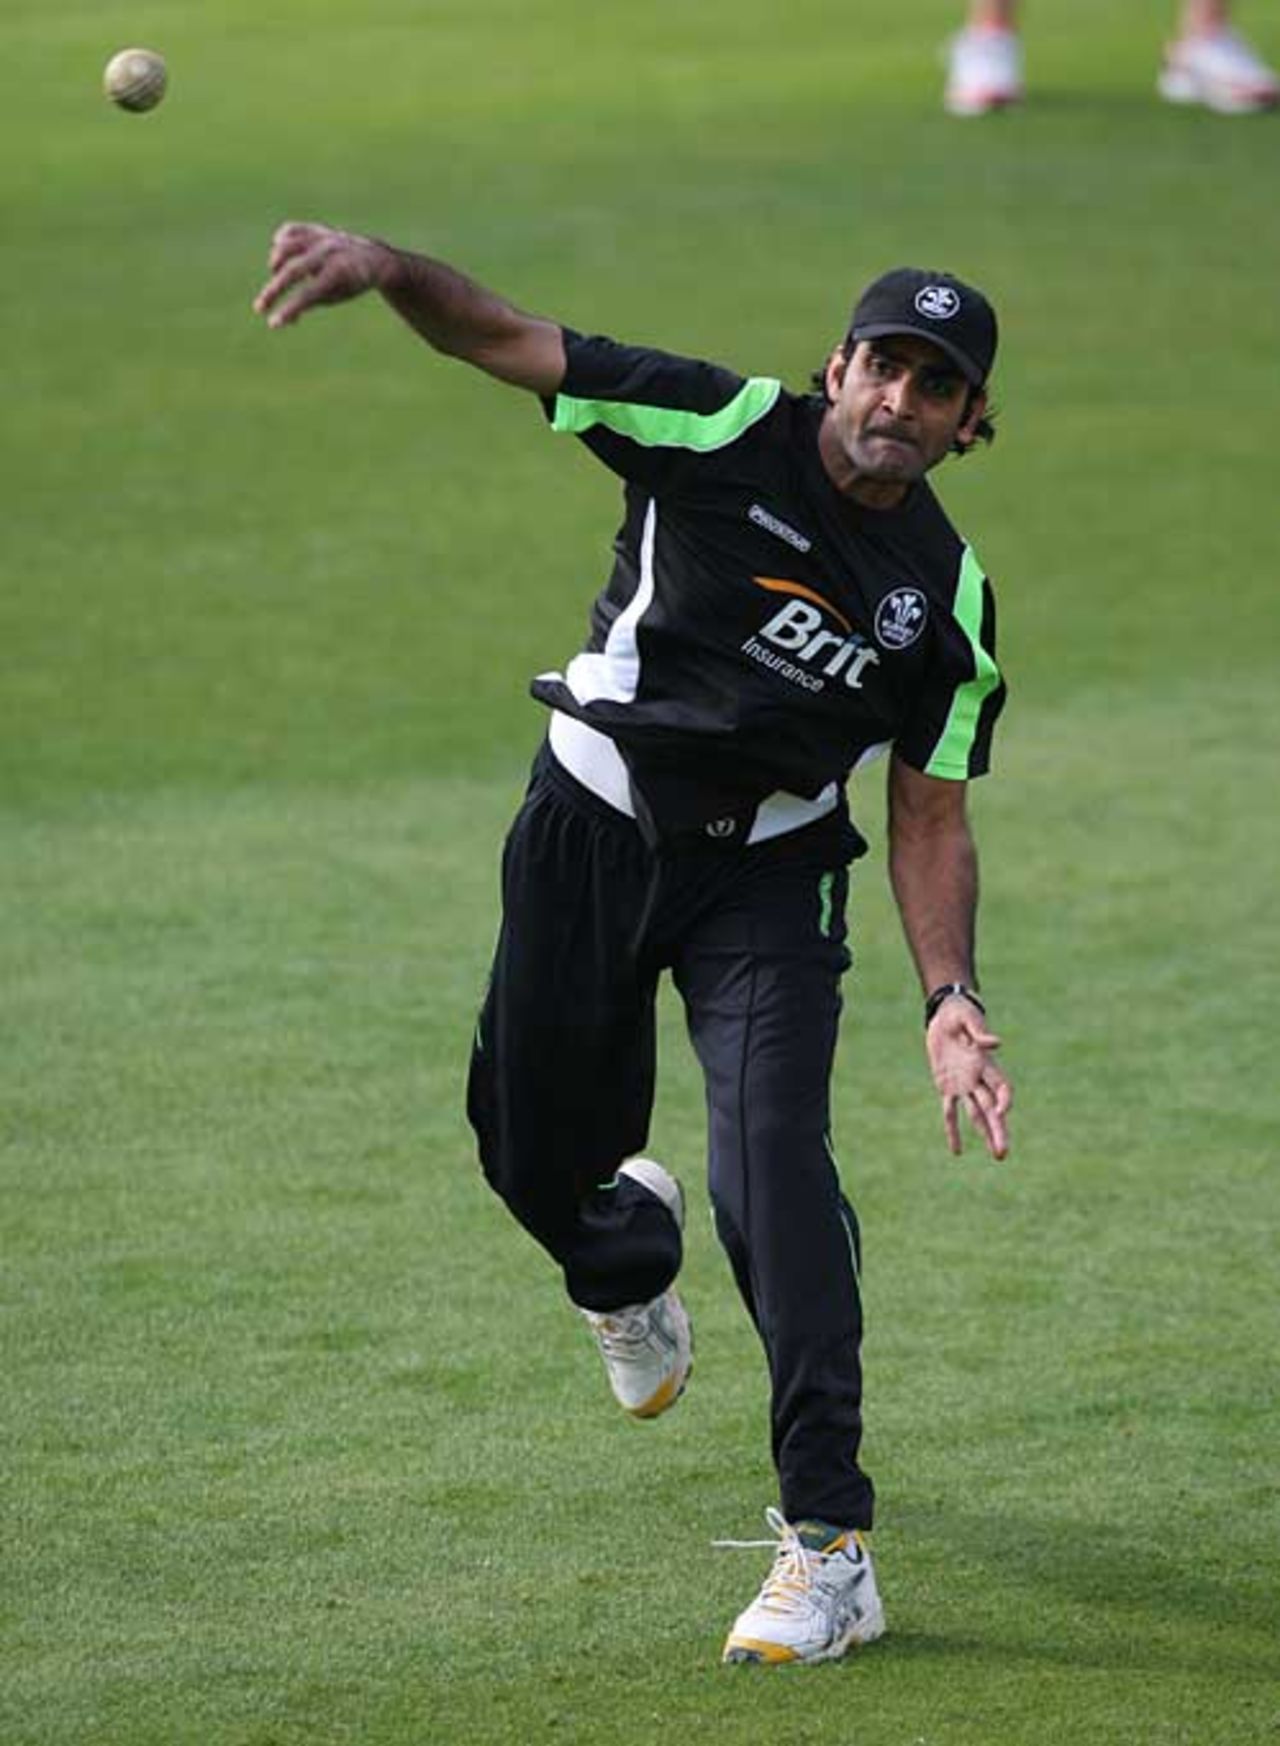 Rao Iftikhar Anjum has arrived in England for his spell with Surrey, The Oval, April 11, 2010